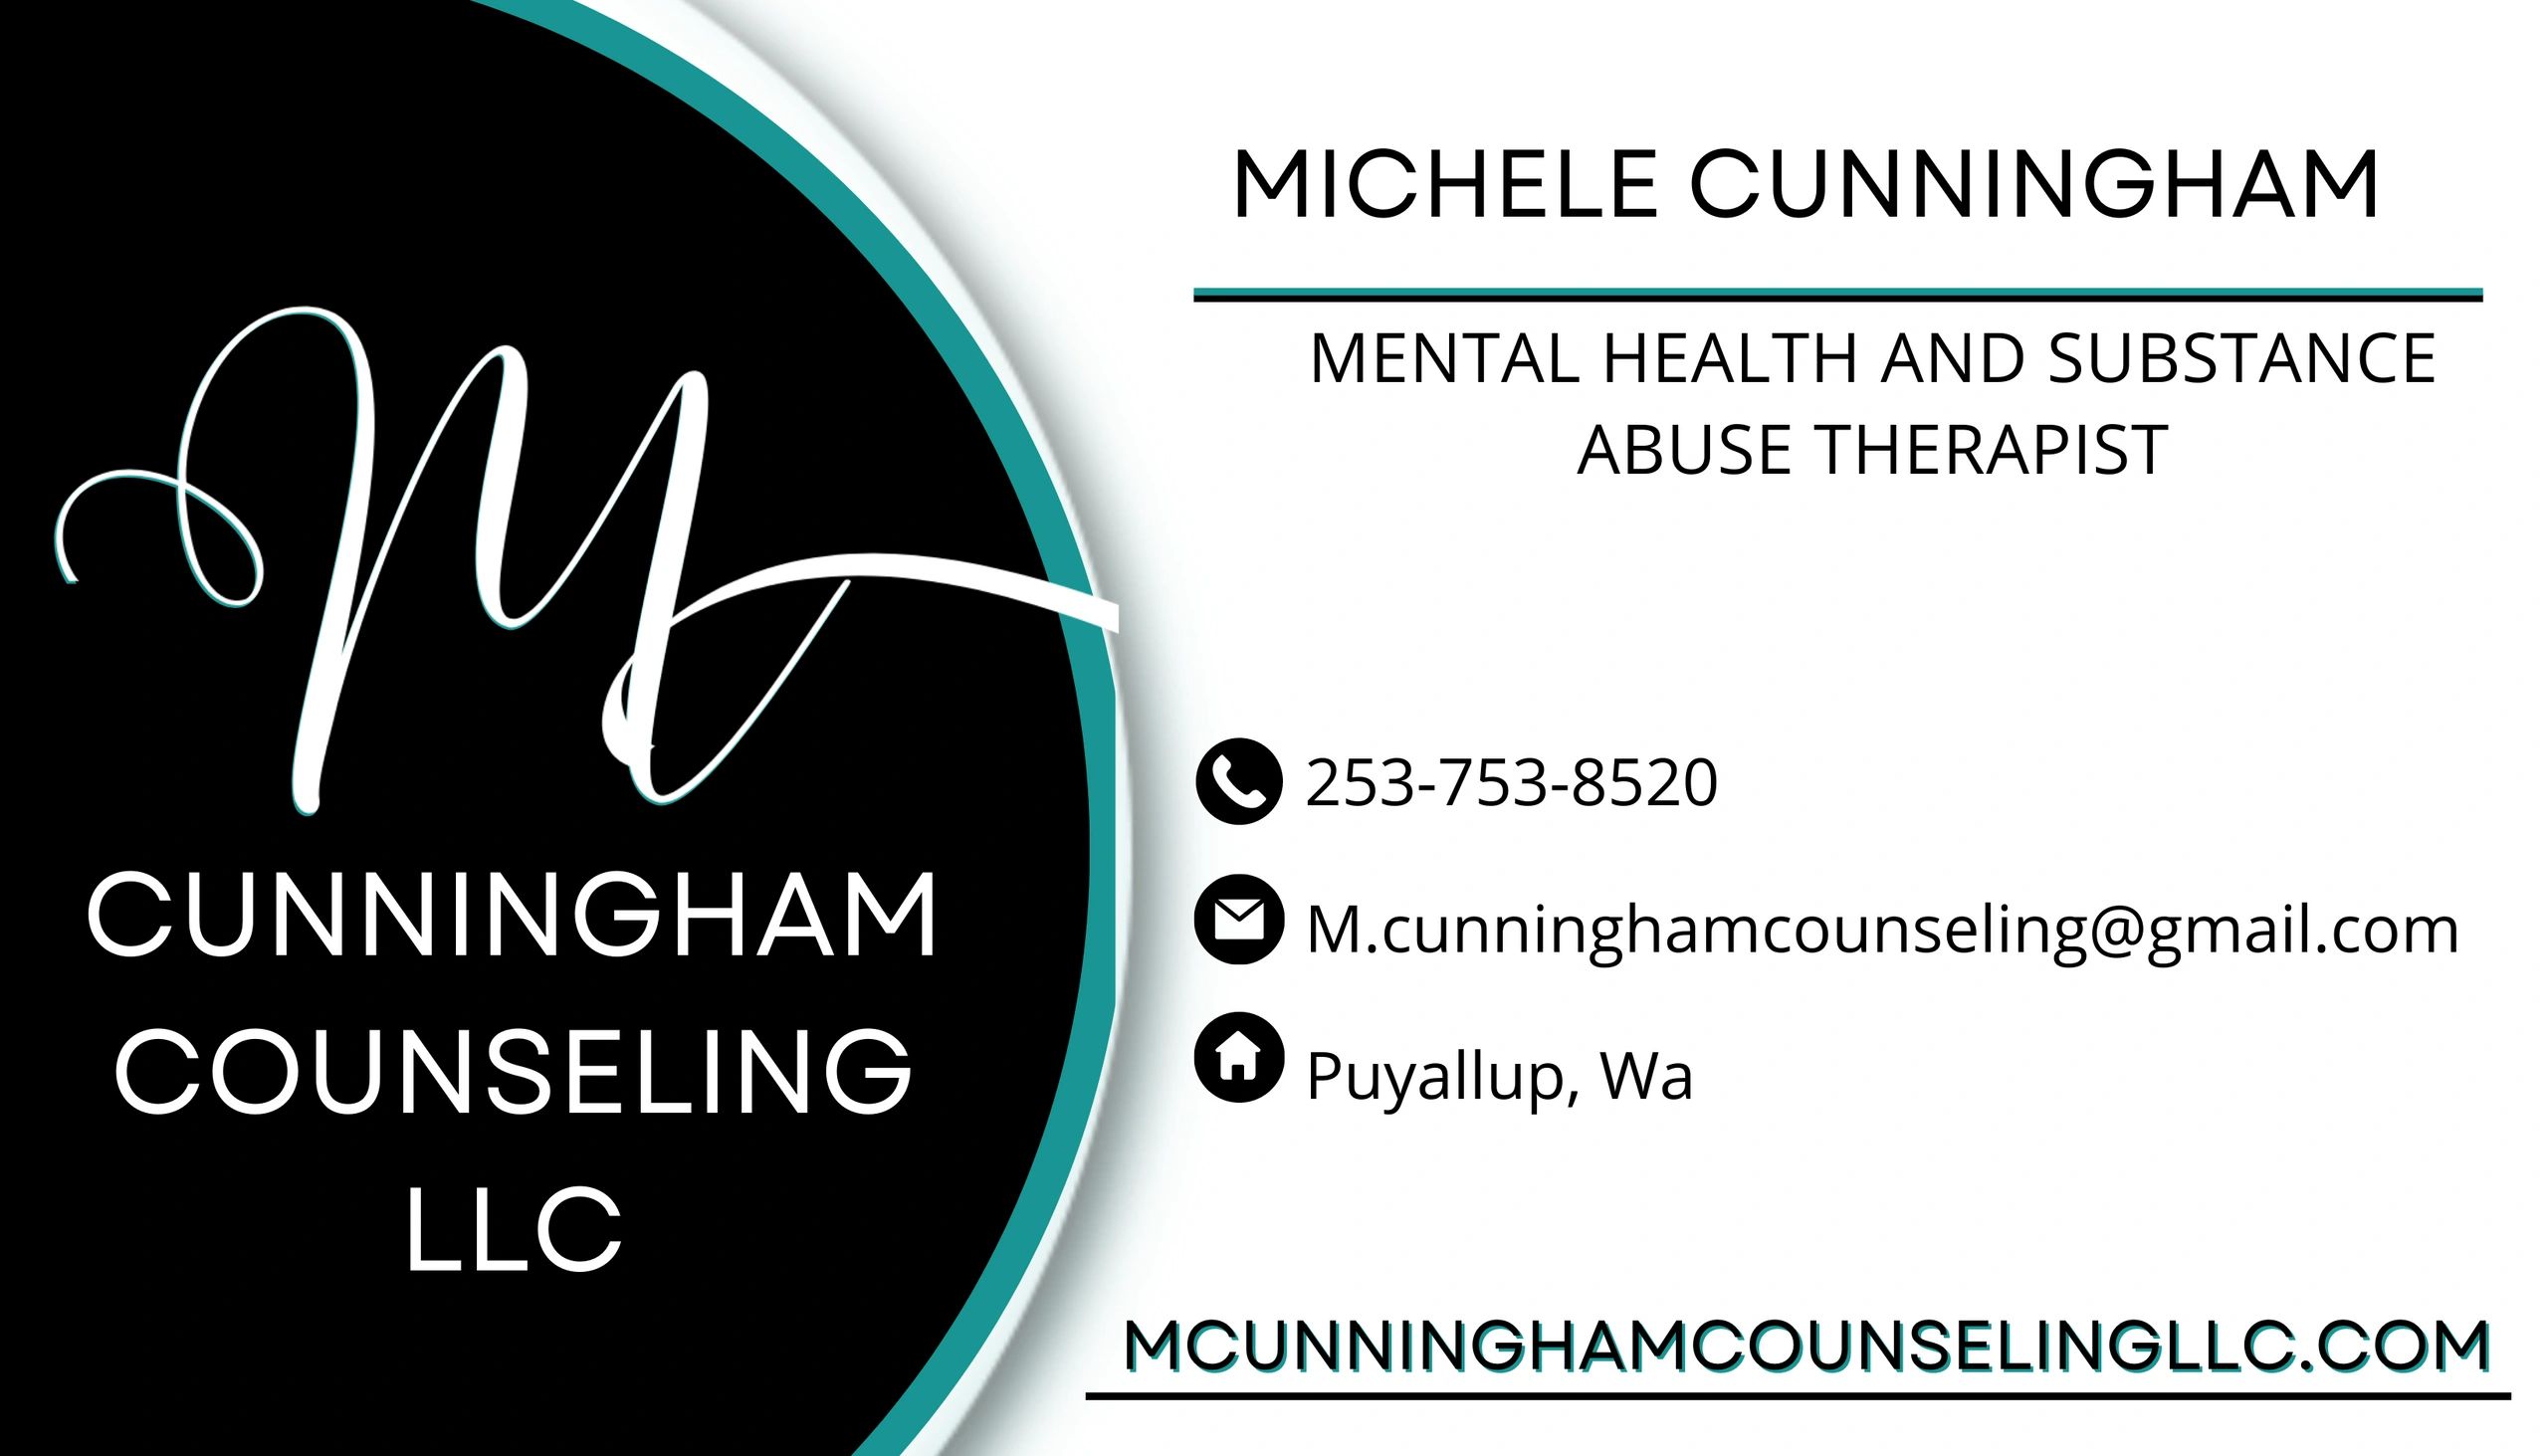 Contact- M. Cunningham Counseling LLC